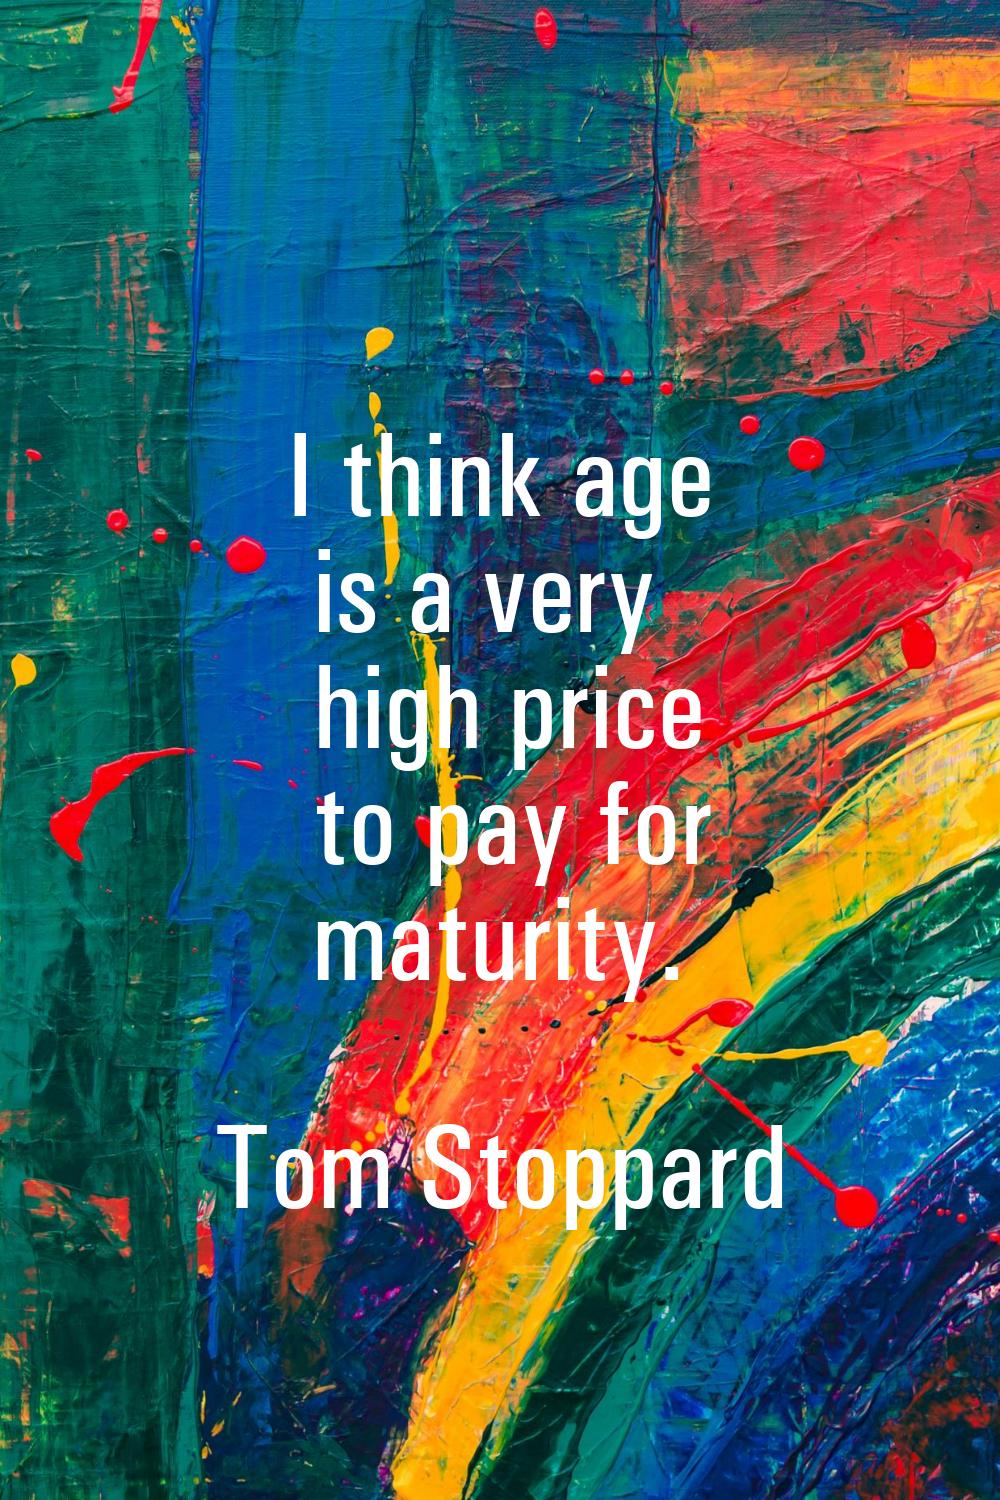 I think age is a very high price to pay for maturity.